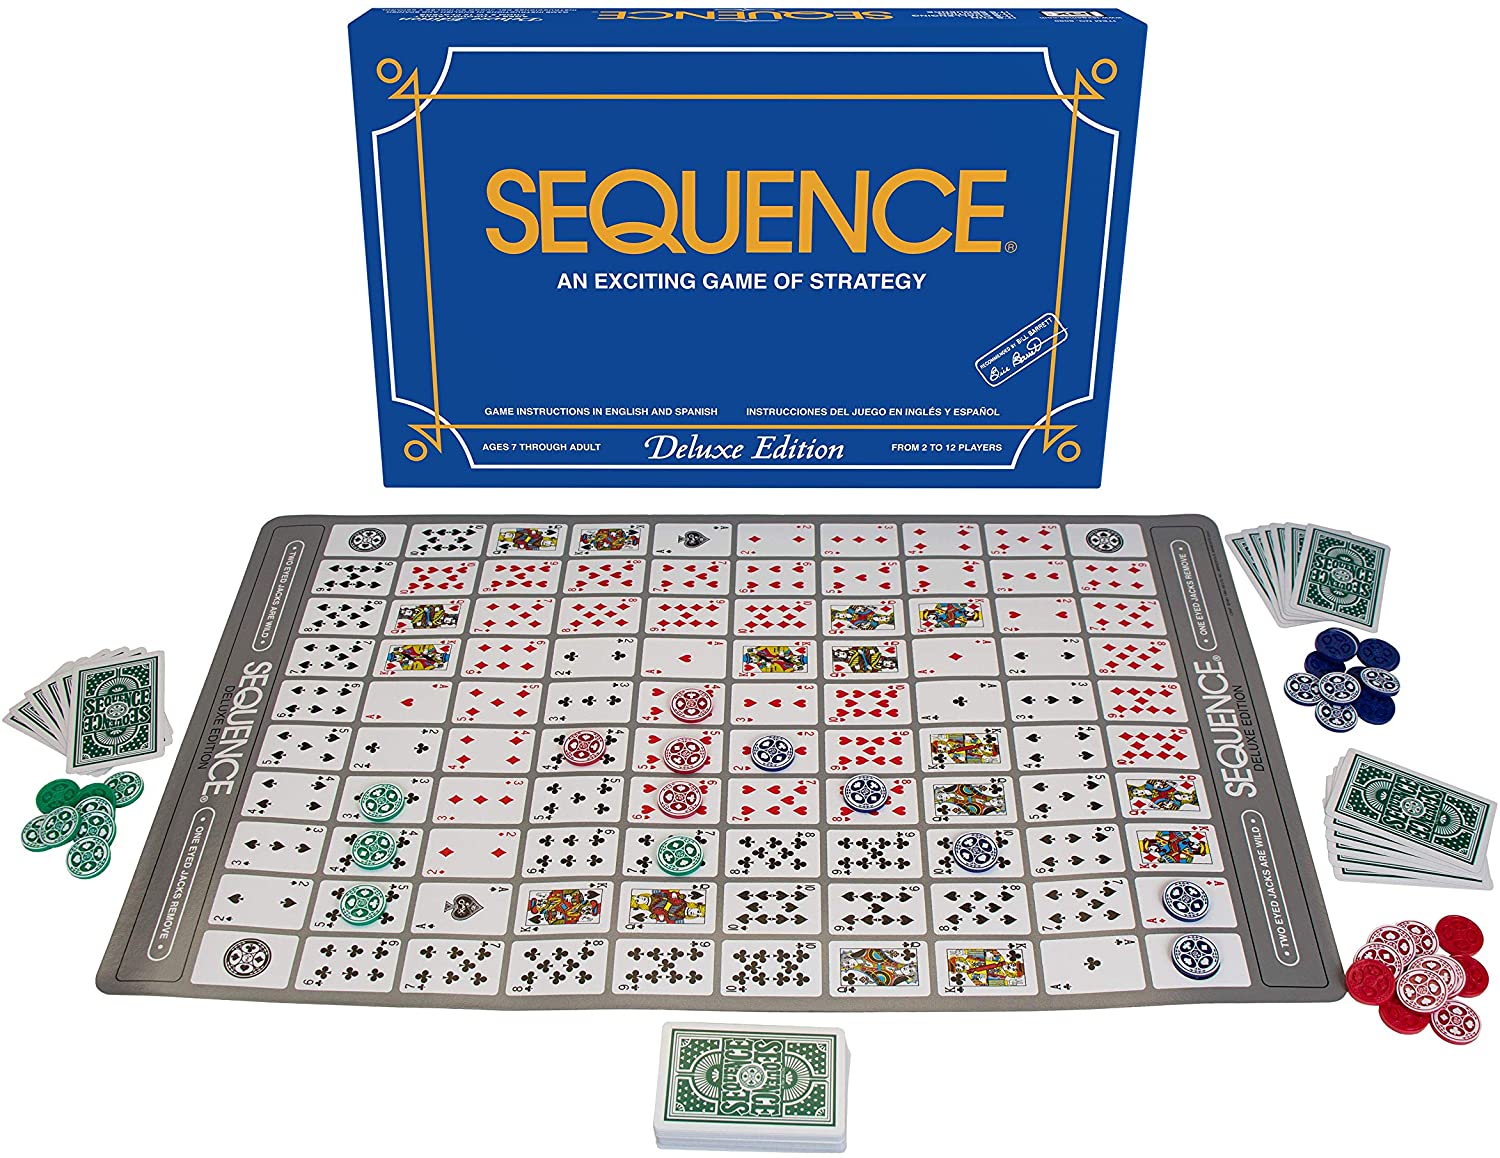 sequence game rules for 2 players